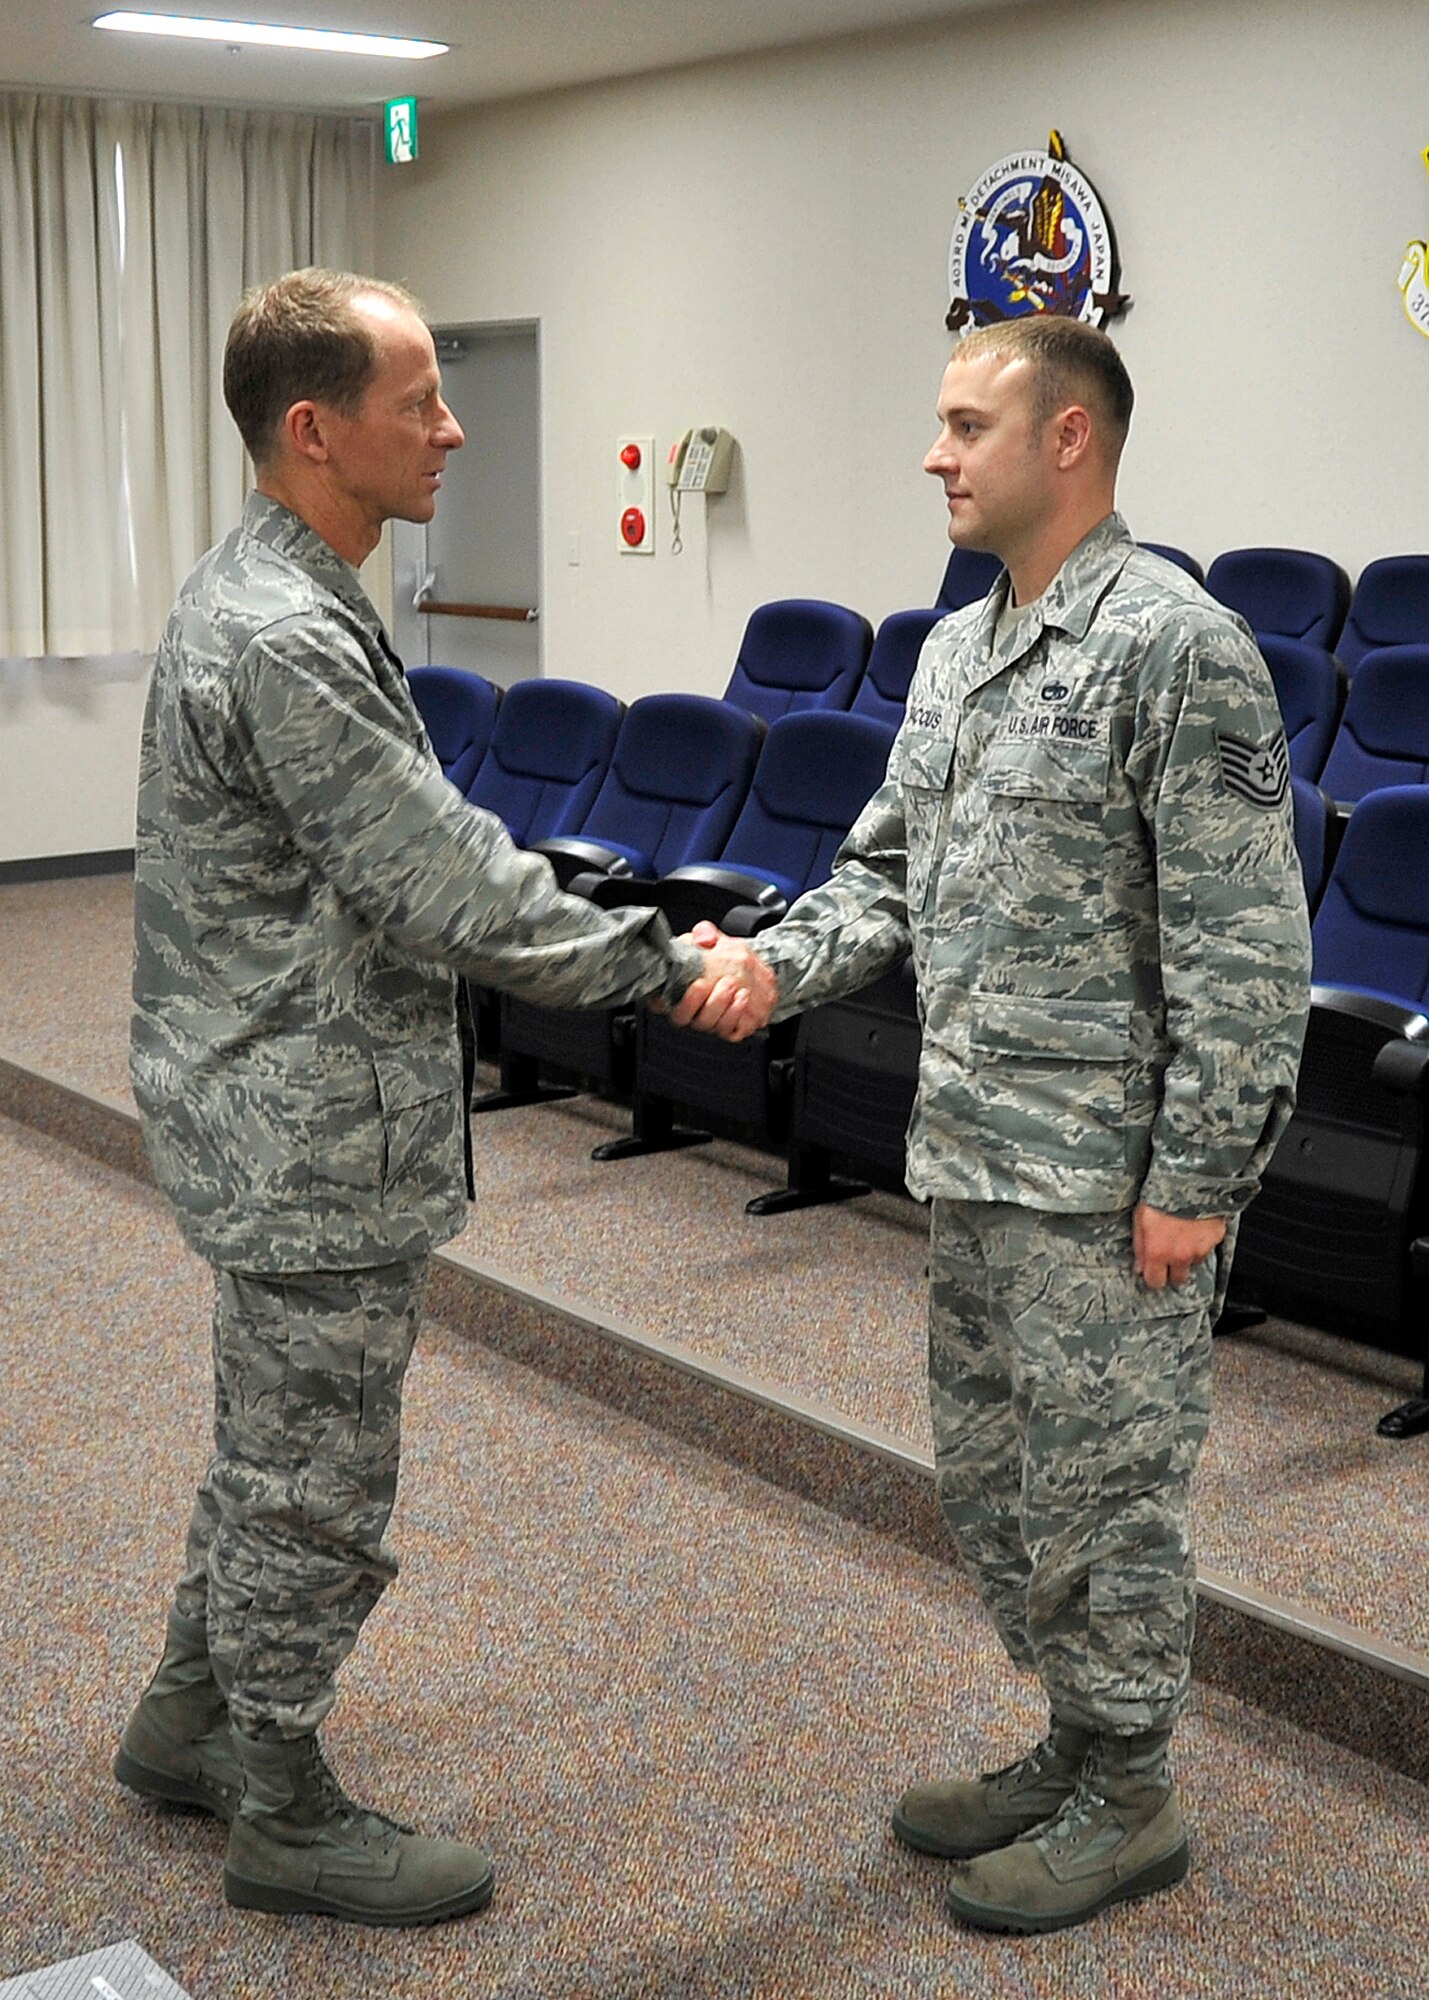 MISAWA AIR BASE, Japan -- Tech Sgt. William Baccus, 35th Maintenance Squadron resource advisor, receives a coin from Col. David Stilwell, 35th Fighter Wing commander, for his achievements in the Noncommissioned Officer Academy at Kadena Air Base June 11, 2009. Sergeant Baccus received the John L. Levitow Award in his class' graduation ceremony. (U.S. Air Force photo by Senior Airman Chad C. Strohmeyer)